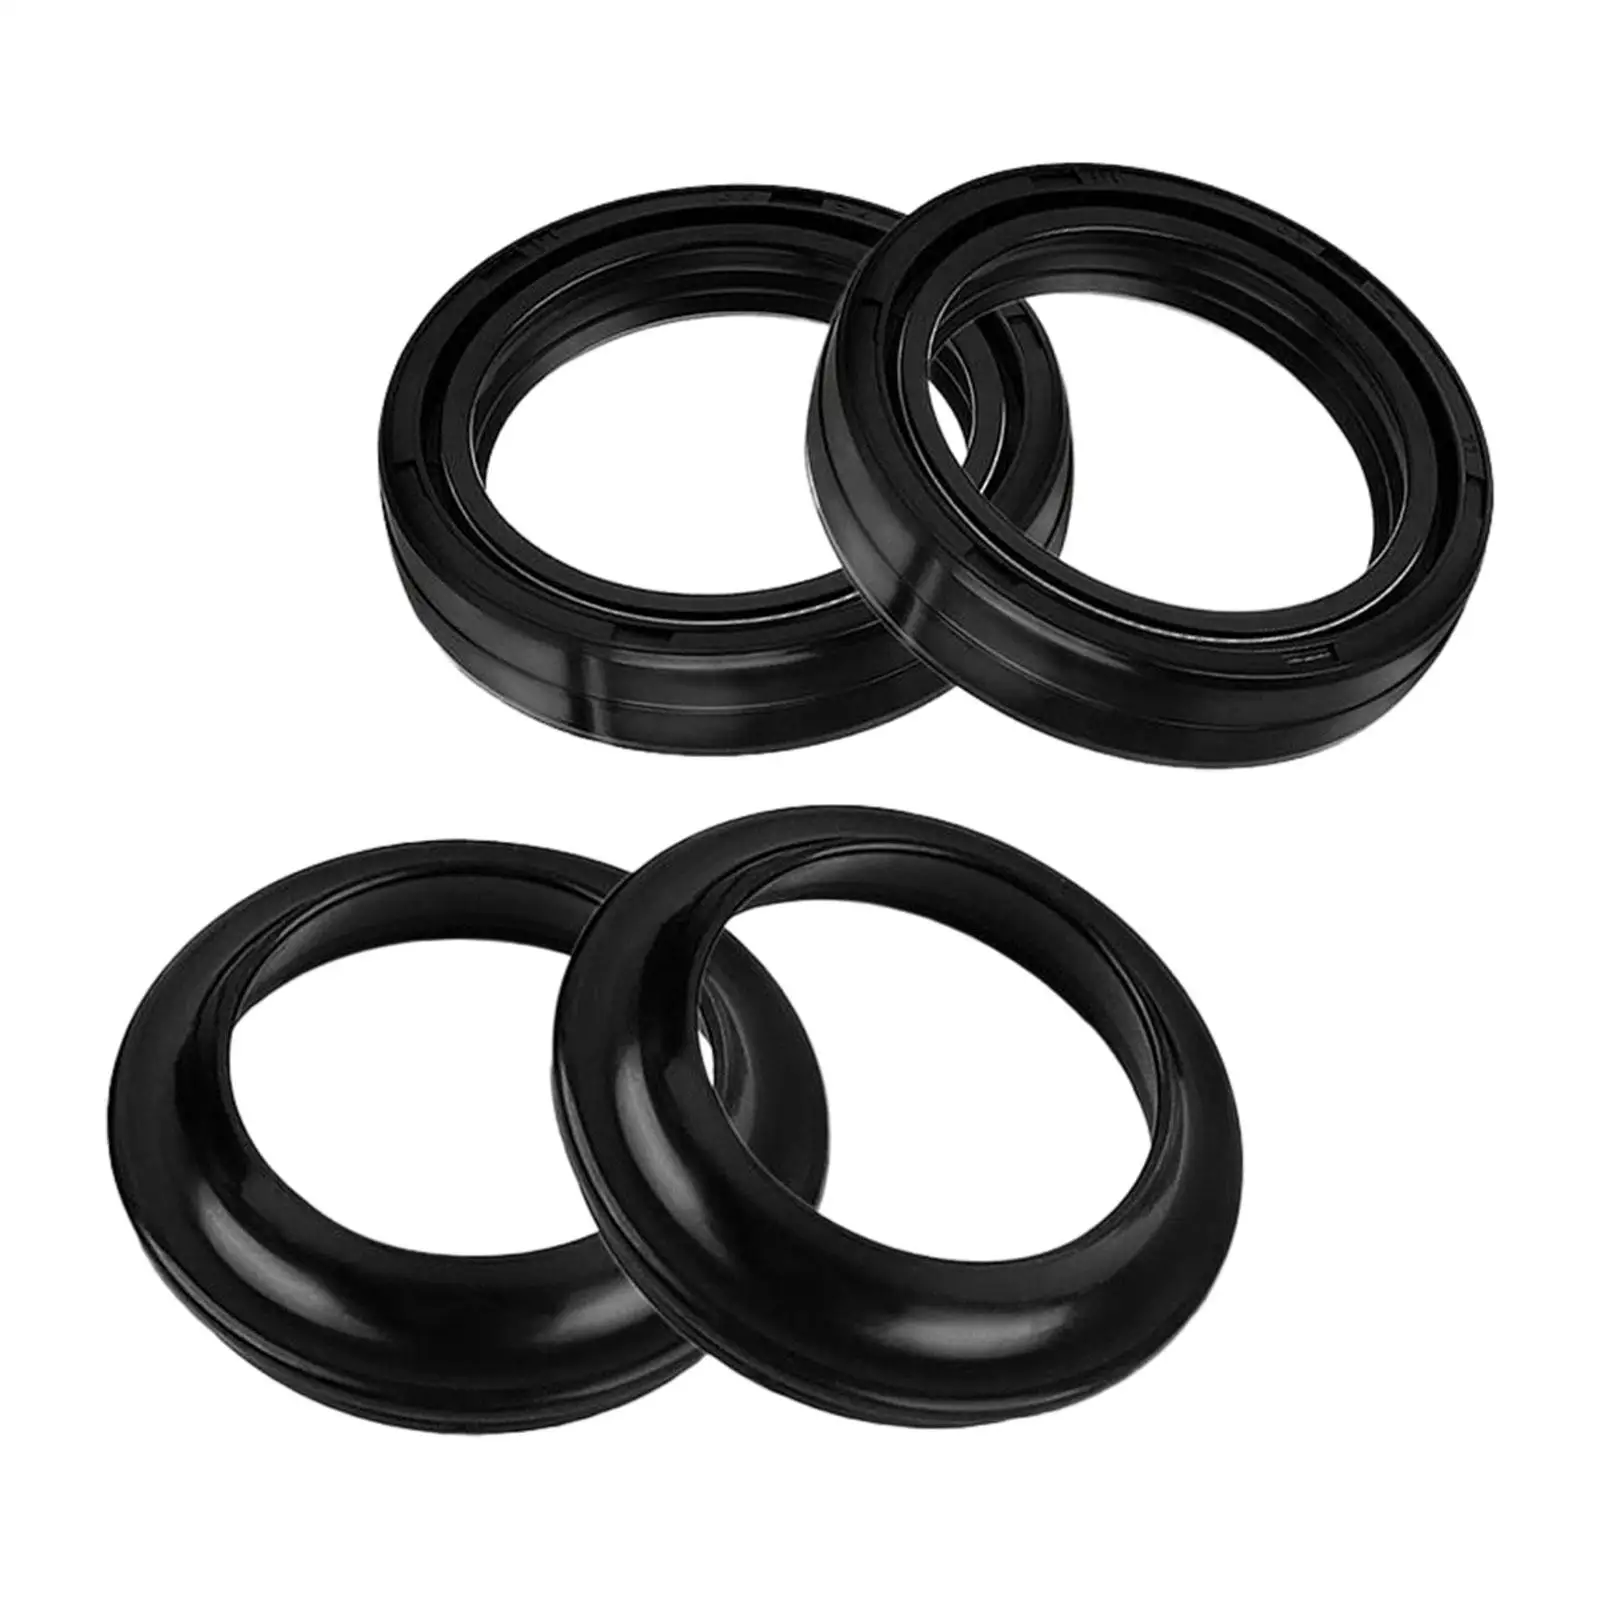 4 Pieces 39x52x11mm Rubber Front Fork Oil Seal & Dust Cover Oil Resistance for Harley XL883N XL1200 XL1200V XL1200N Xlh1100